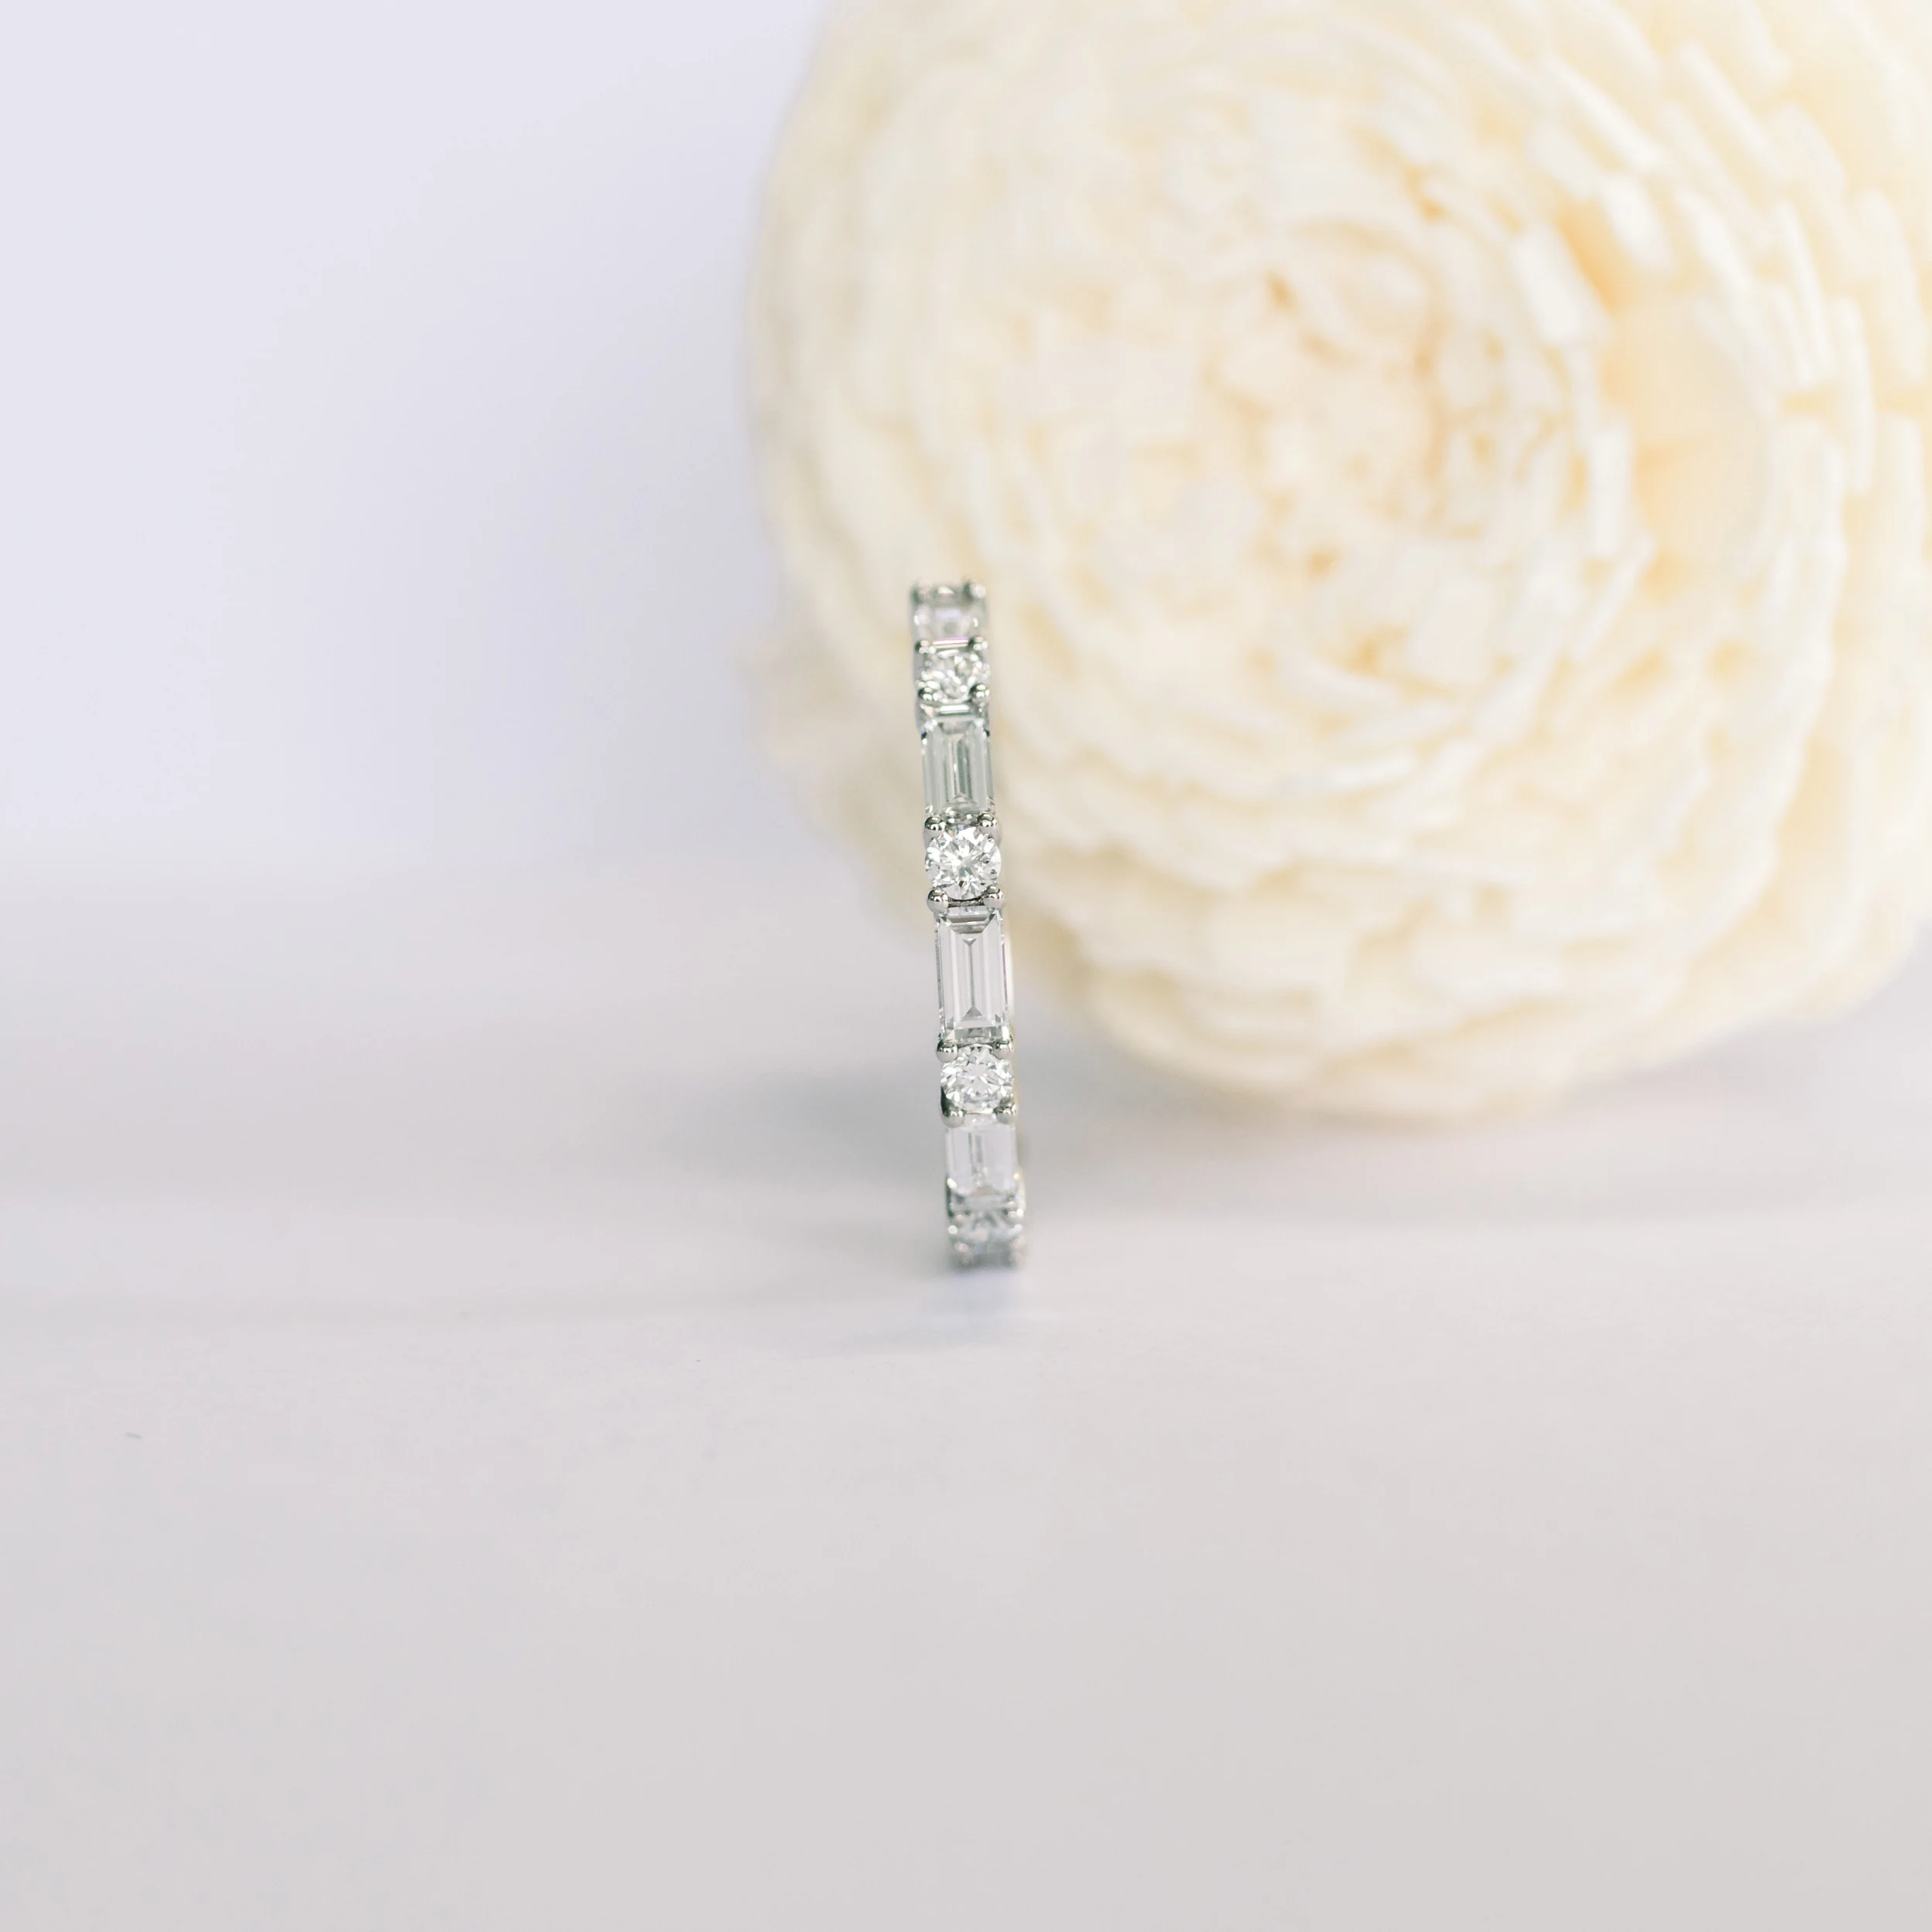 Platinum Baguette and Round Three Quarter Band featuring Hand Selected 1.0 ct Lab Diamonds (Side View)